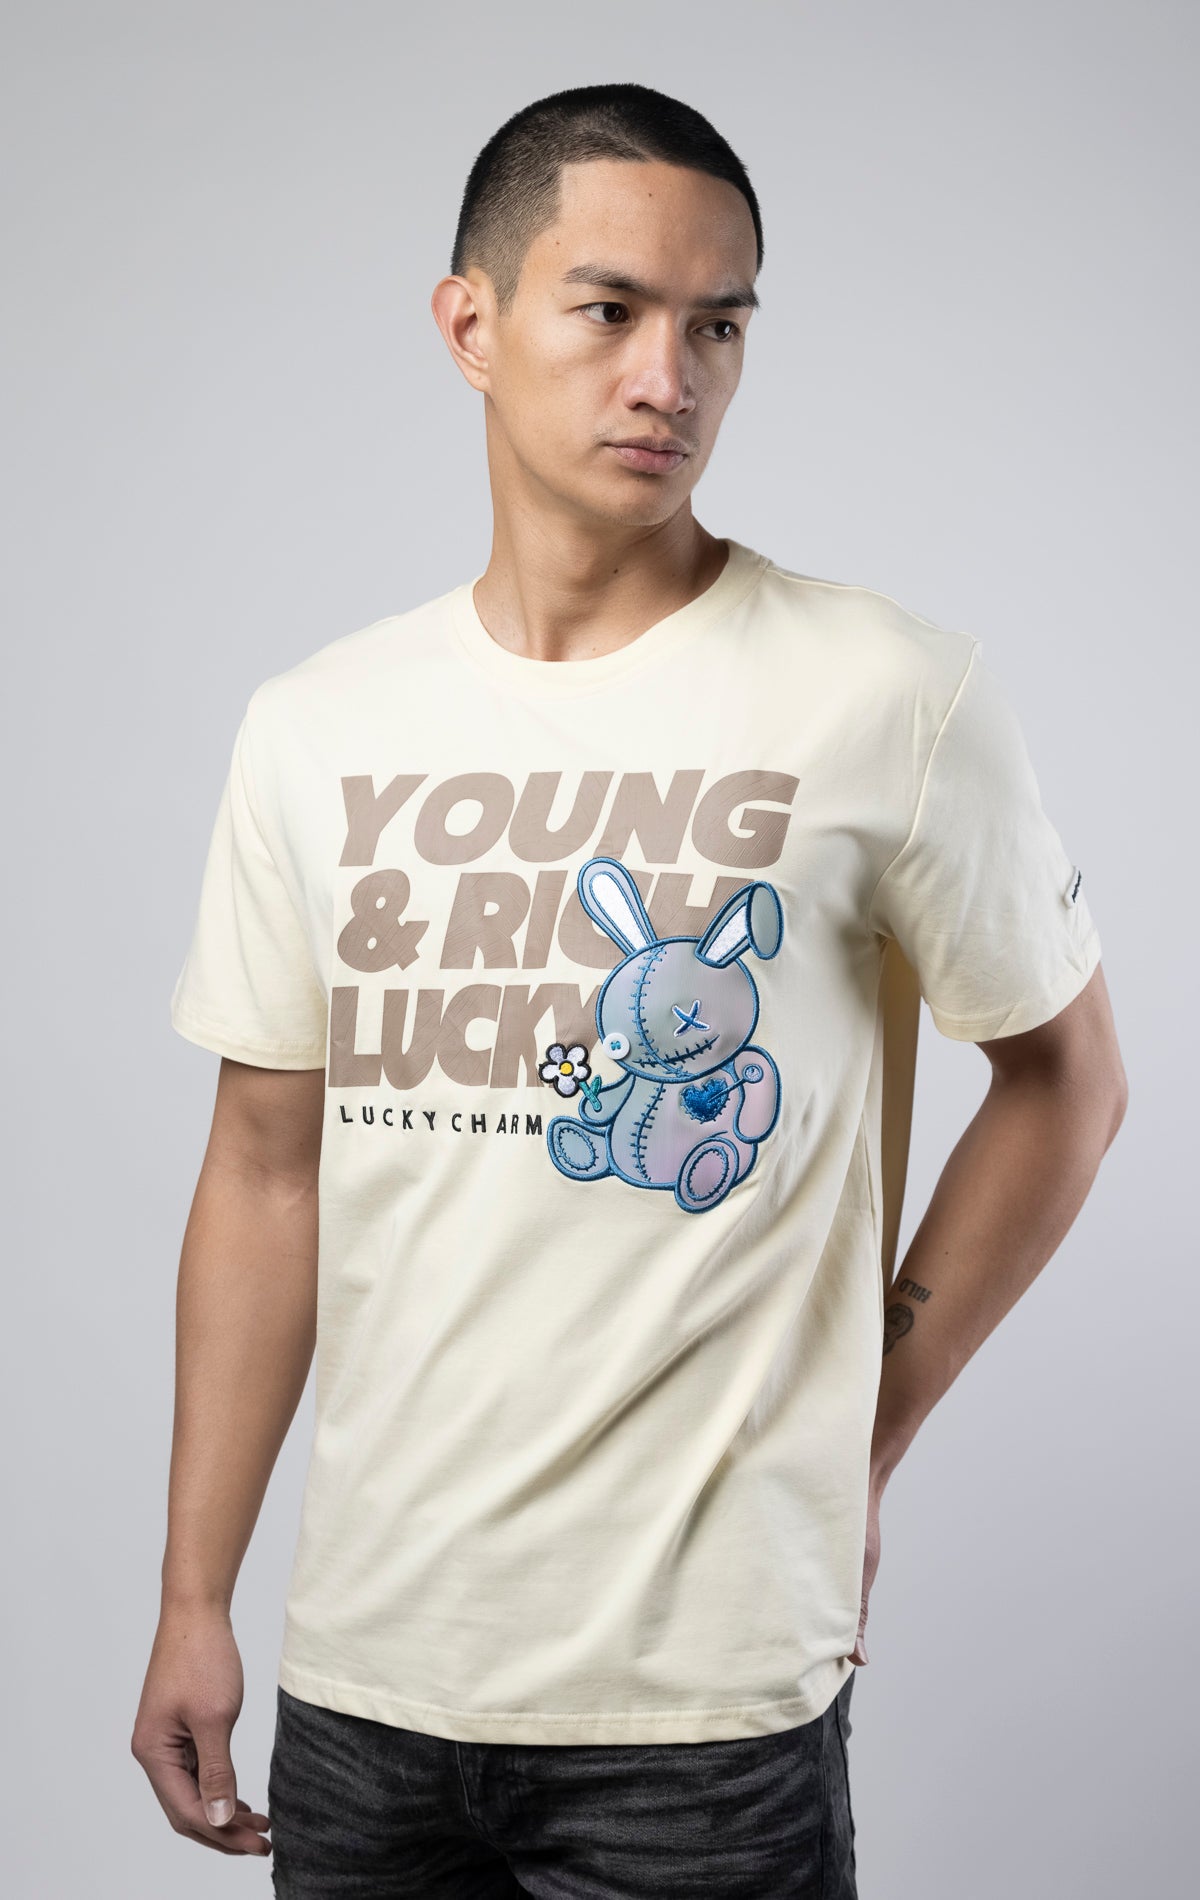 Stylish off white T-shirt featuring a motivational 'Young, Rich, and Lucky' slogan